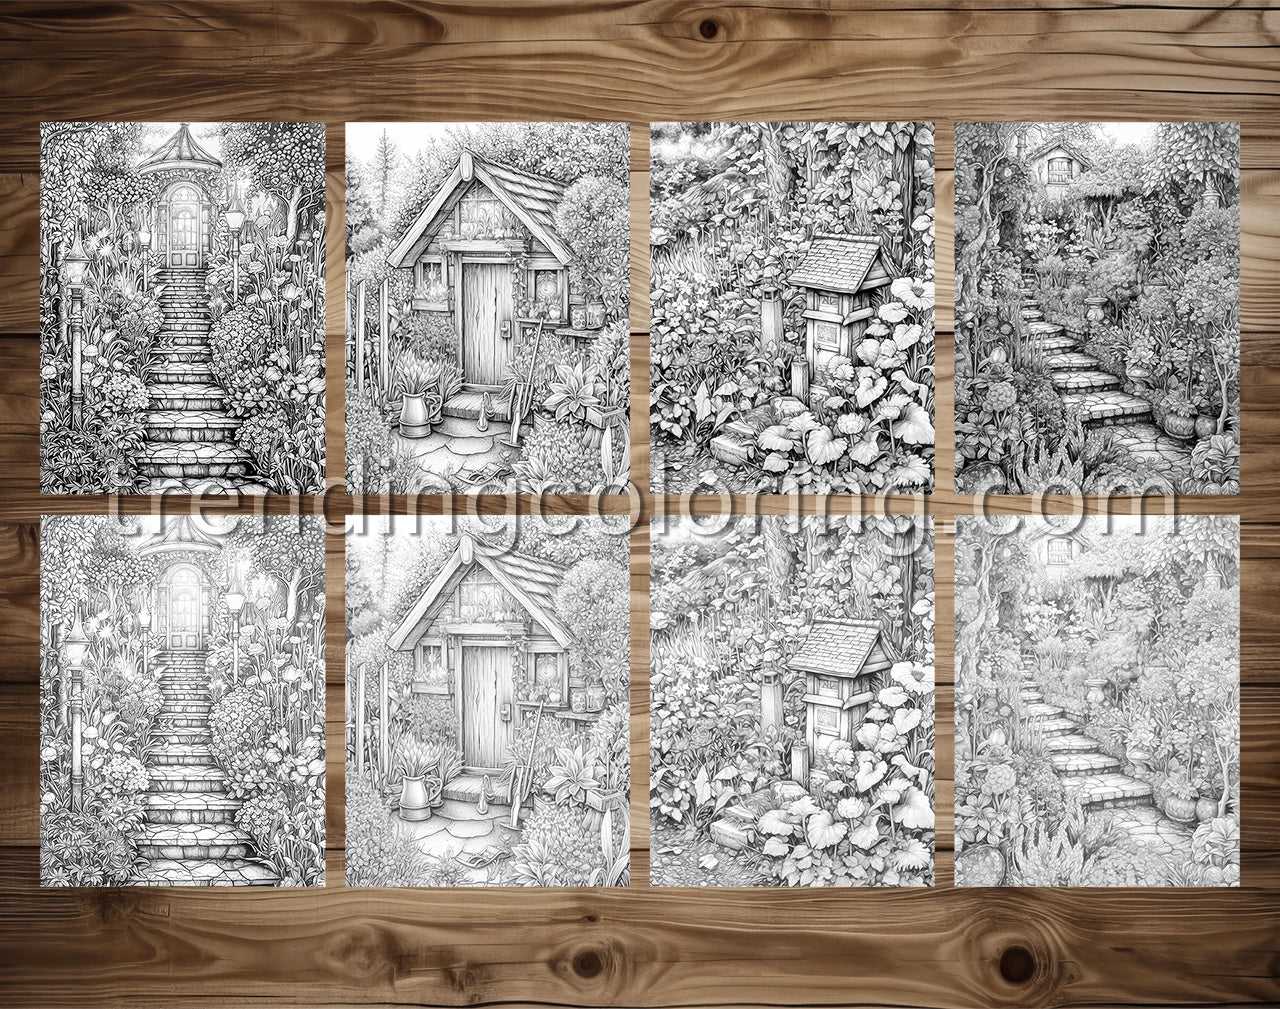 25 Enchanted Garden Grayscale Coloring Pages- Instant Download - Printable PDF